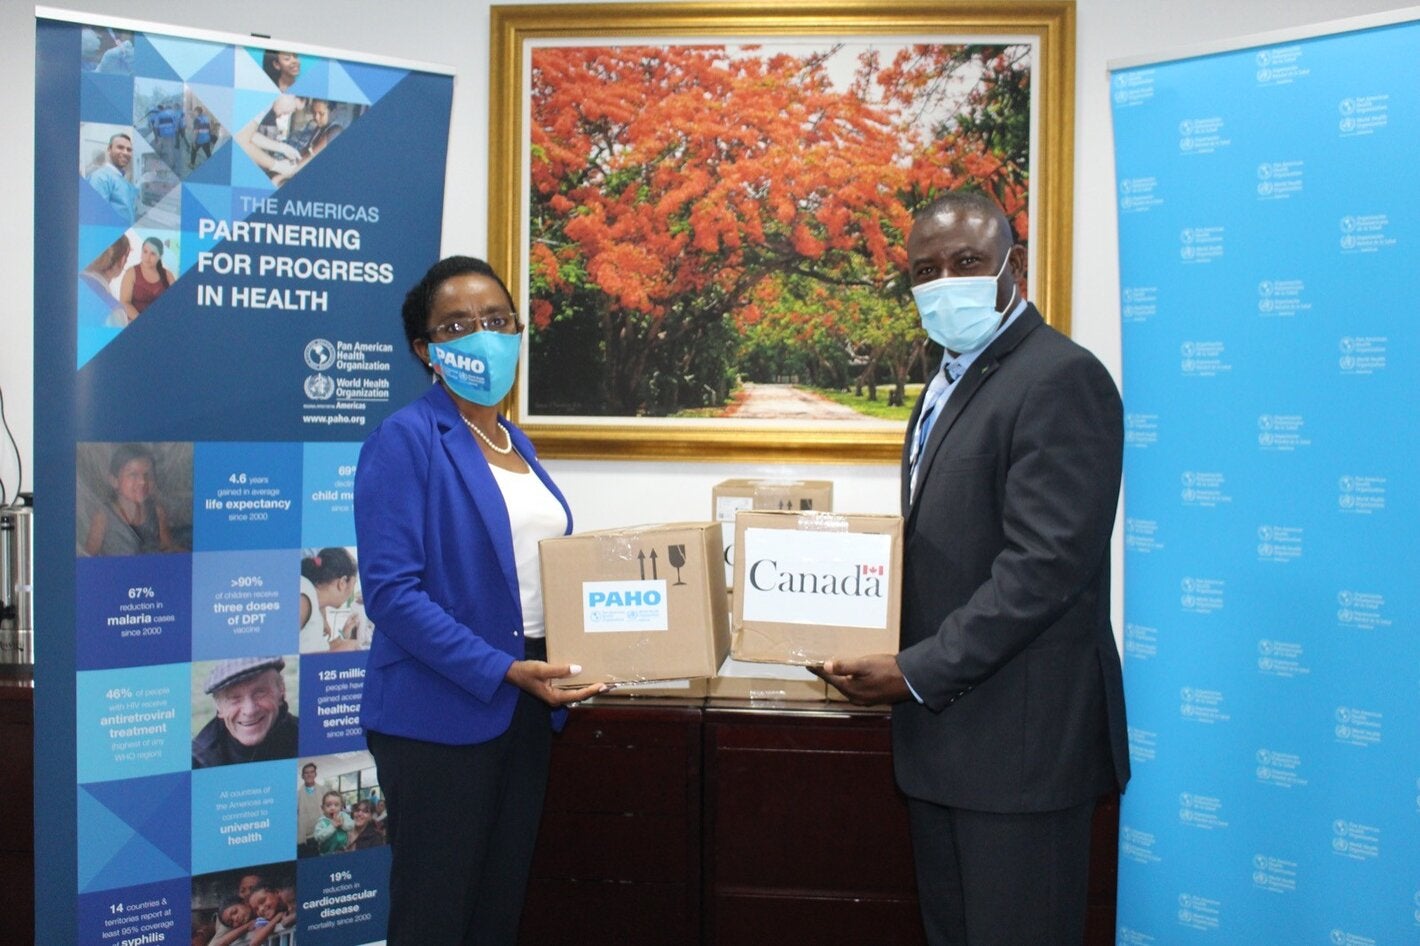 Health Ministry Of The Bahamas Receives Donation Of Covid-19 Test Kits From Canadian Government And Paho-who Bahamas And Turks And Caicos Islands - Pahowho Pan American Health Organization